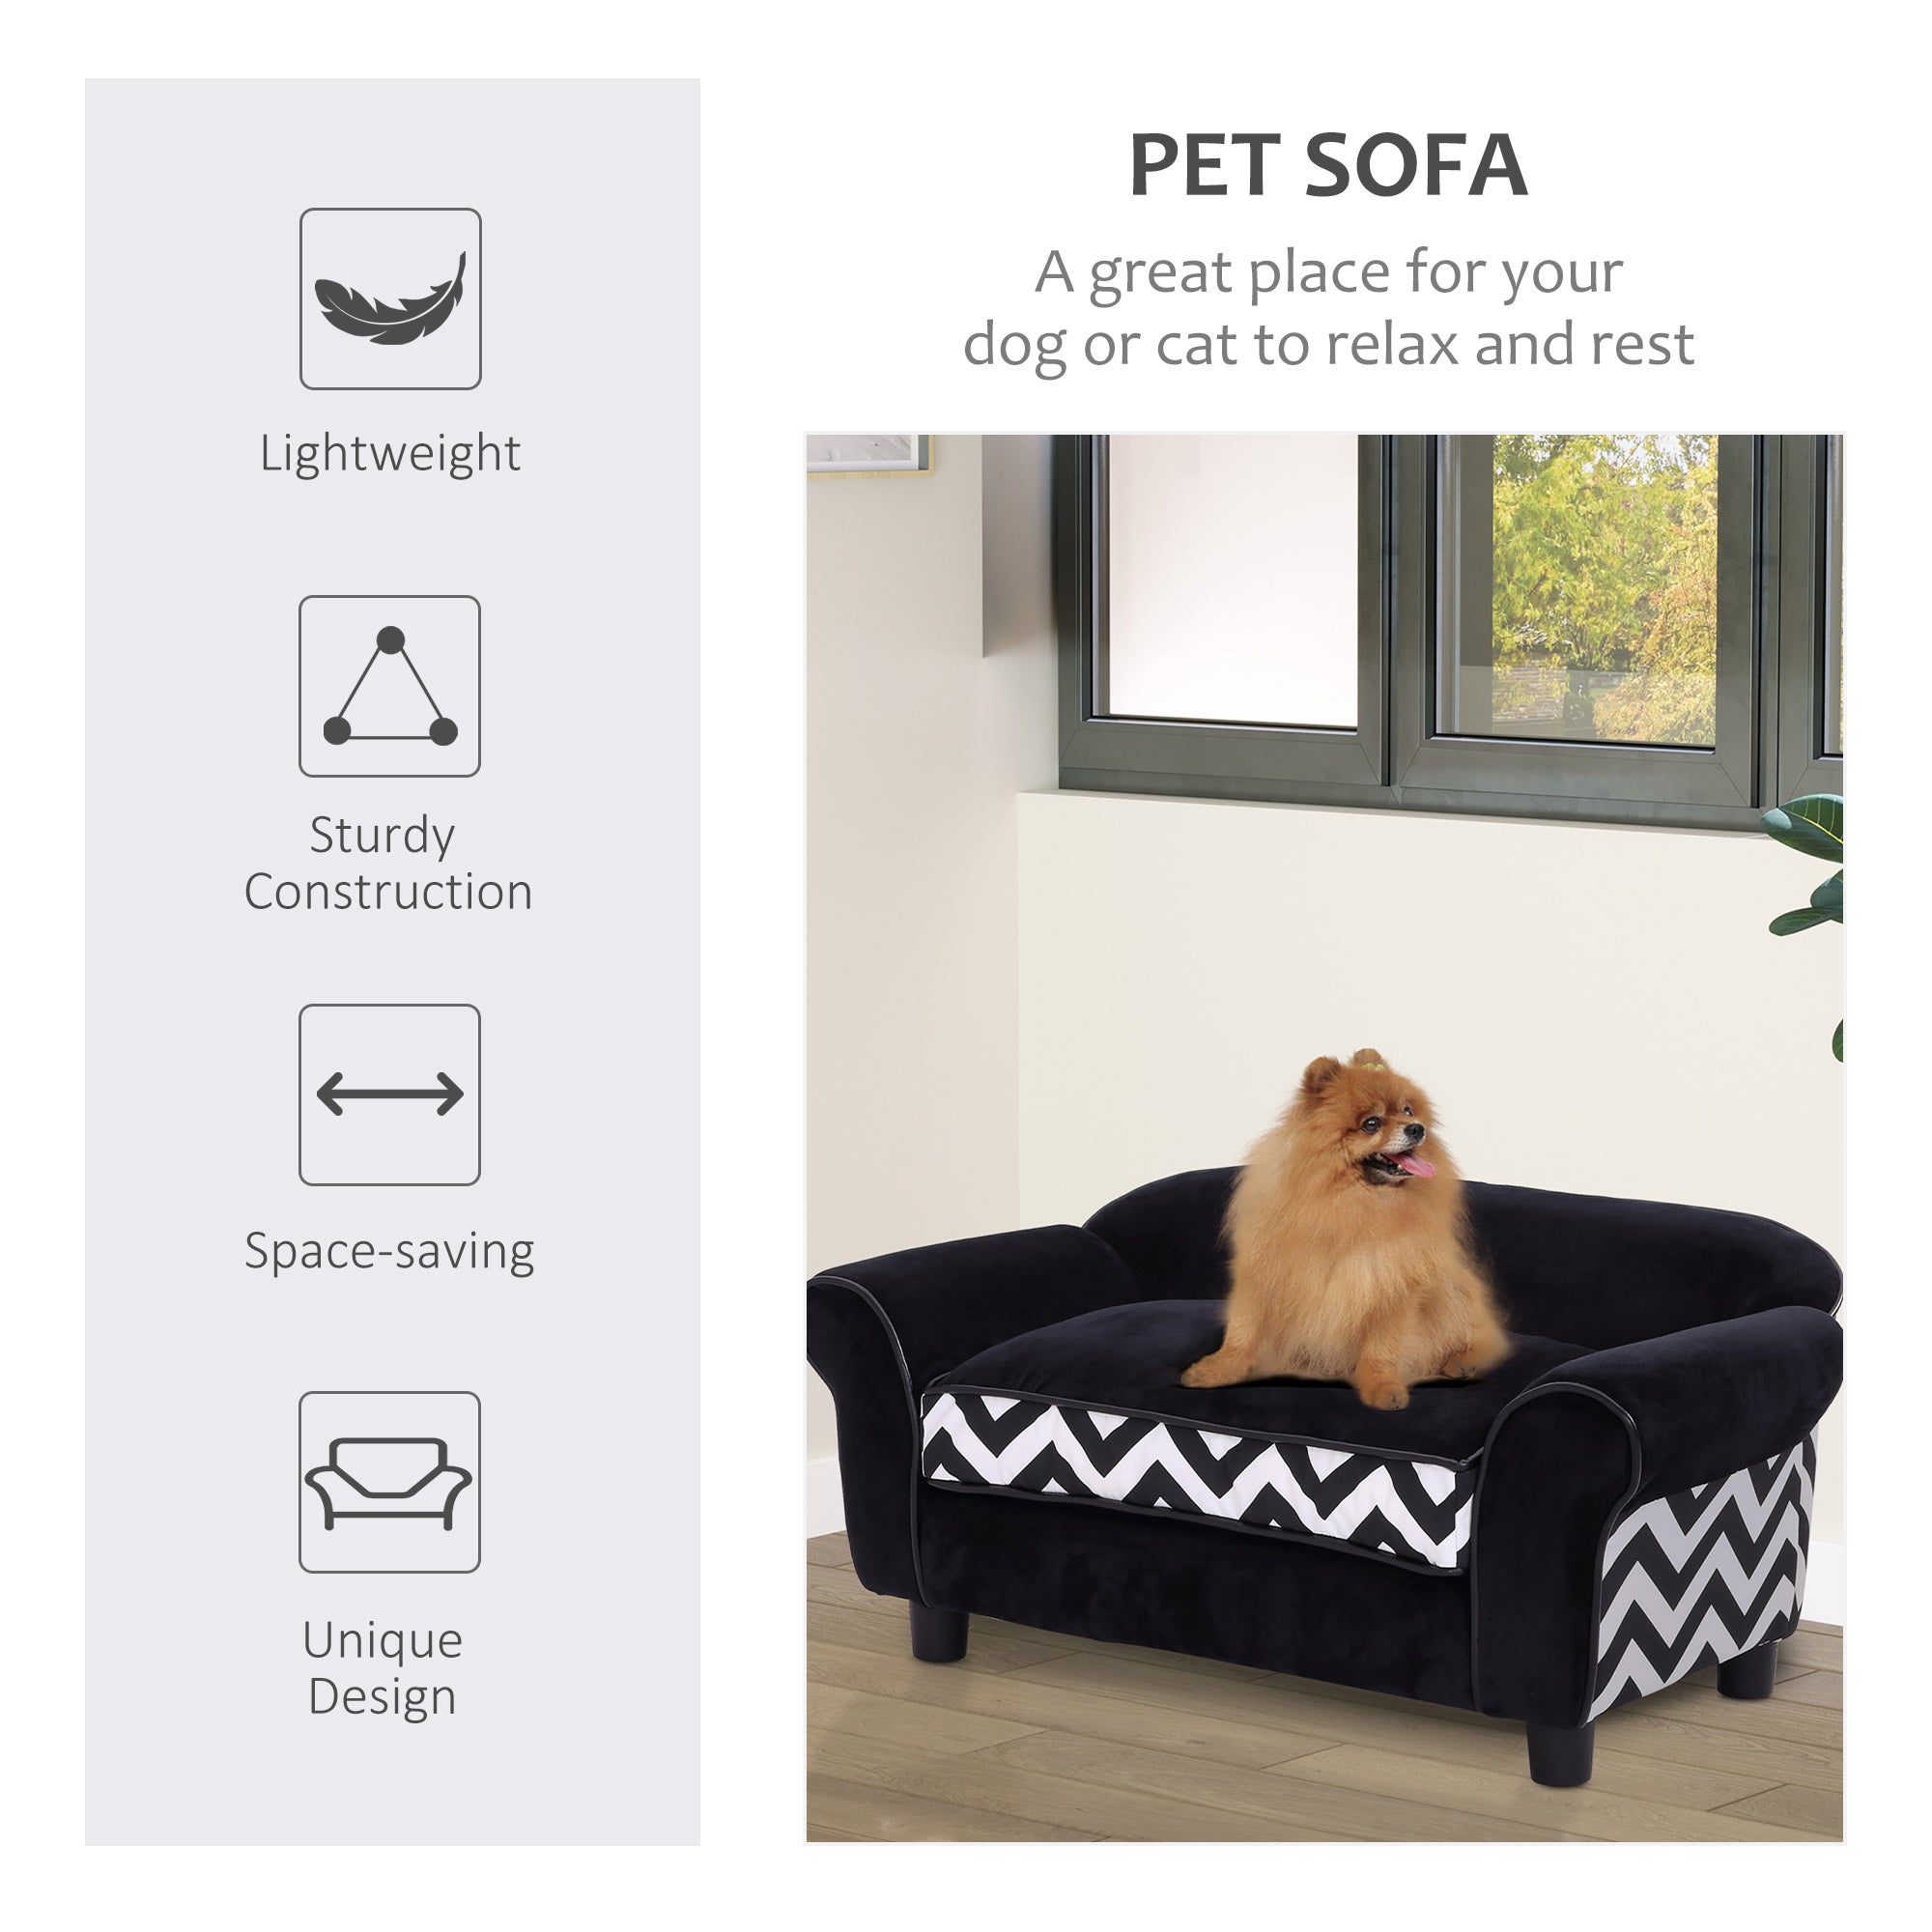 PawHut Dog Sofa Bed for XS-Sized Dogs, Cat Sofa with Soft Cushion, Pet Chair Lounge with Washable Cover, Removable Legs, Wooden Frame - Black